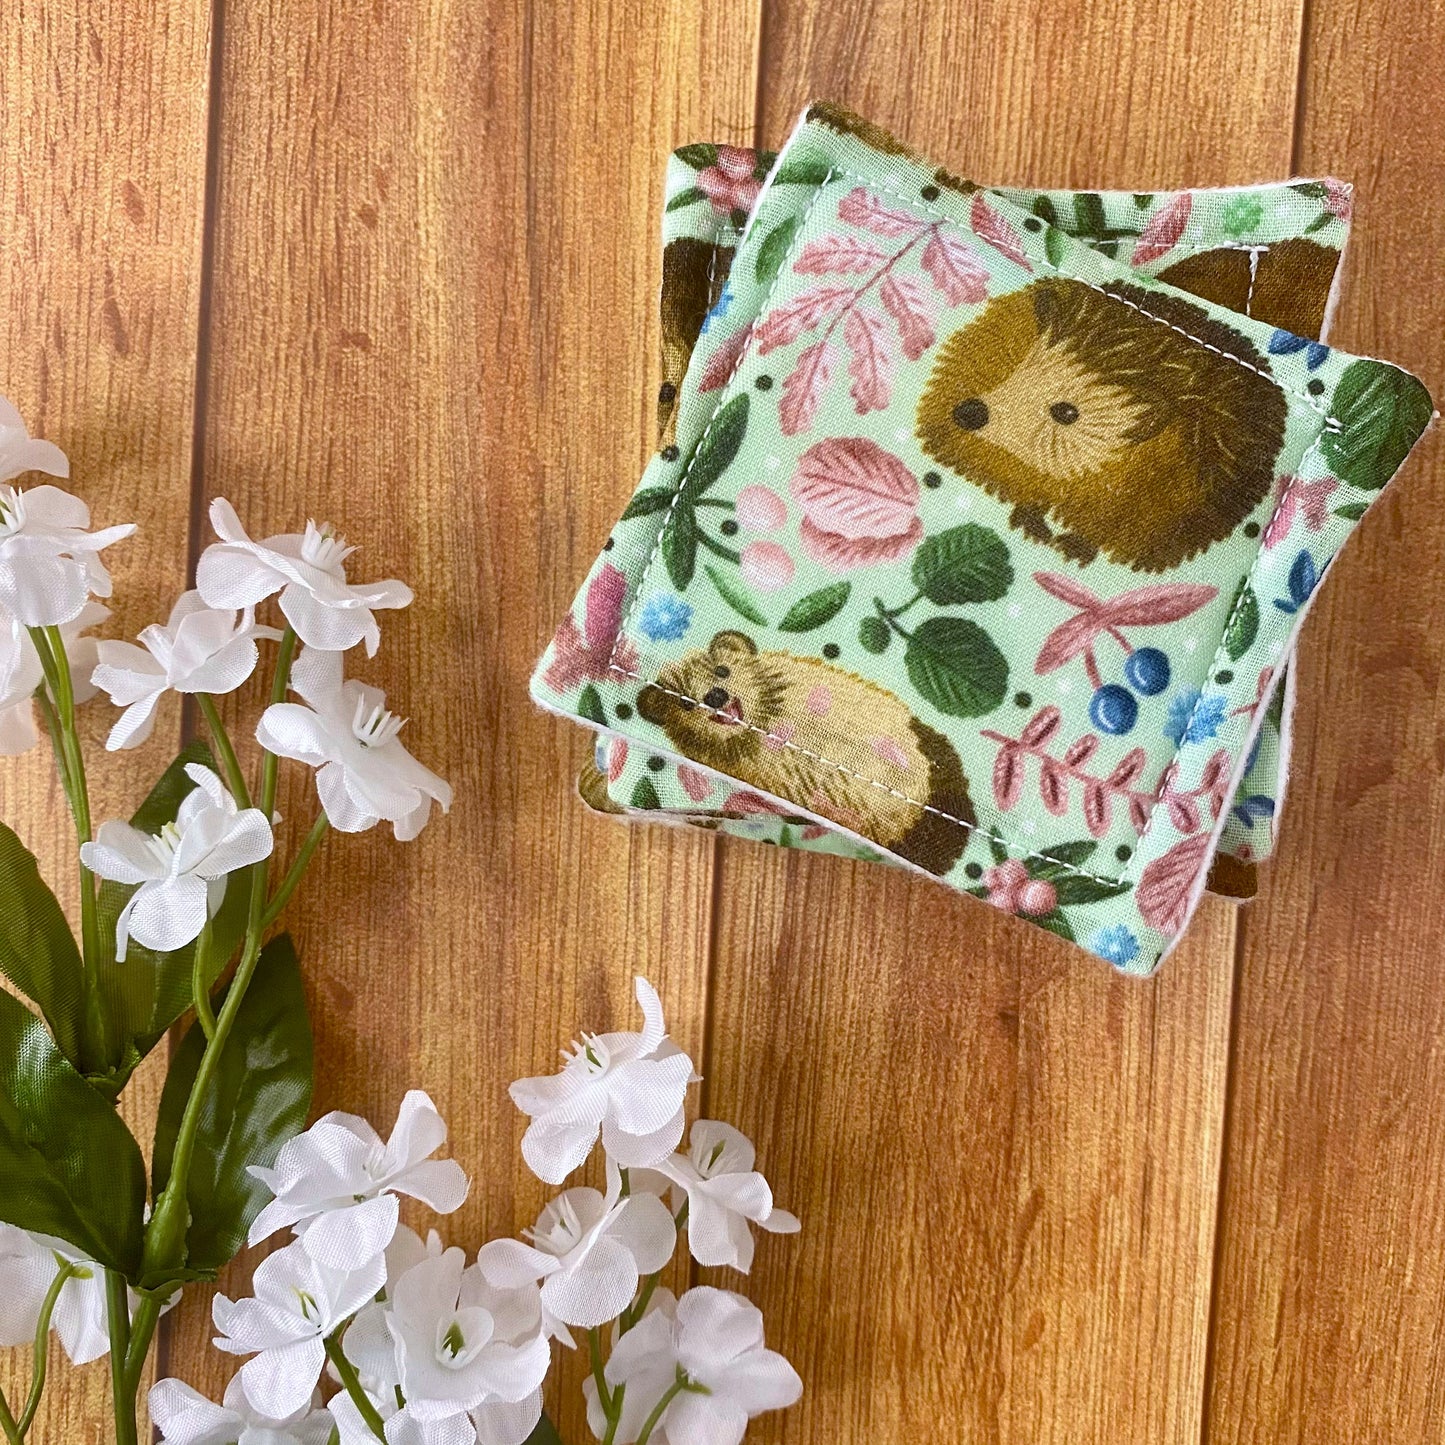 reusable skincare pads with hedgehog pattern on wood surface